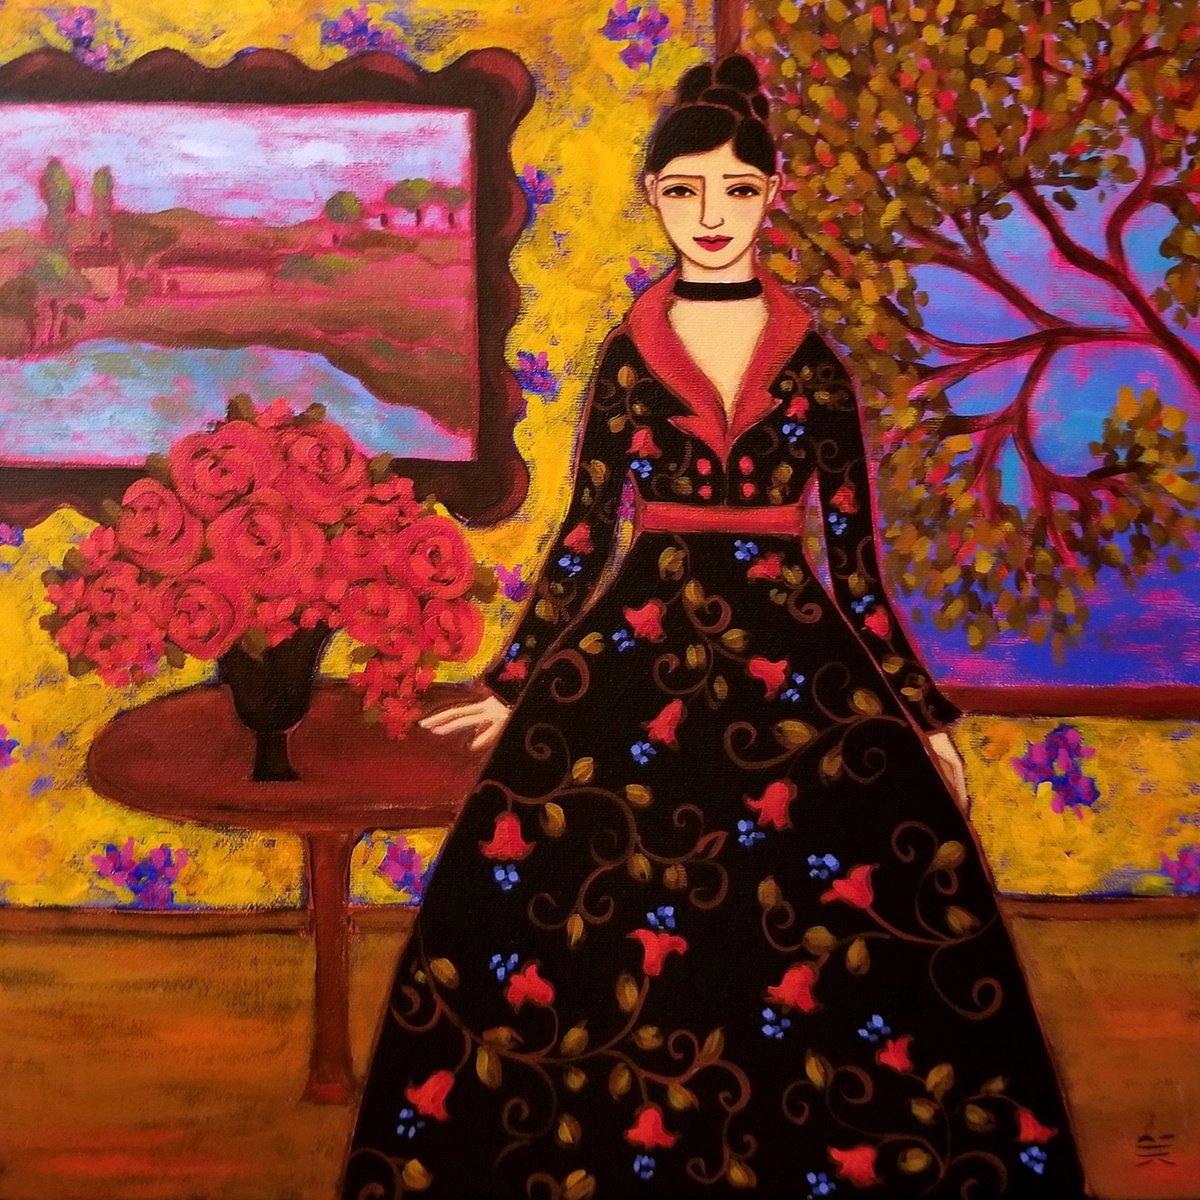 Woman with Roses and Landscape by Karen Rieger